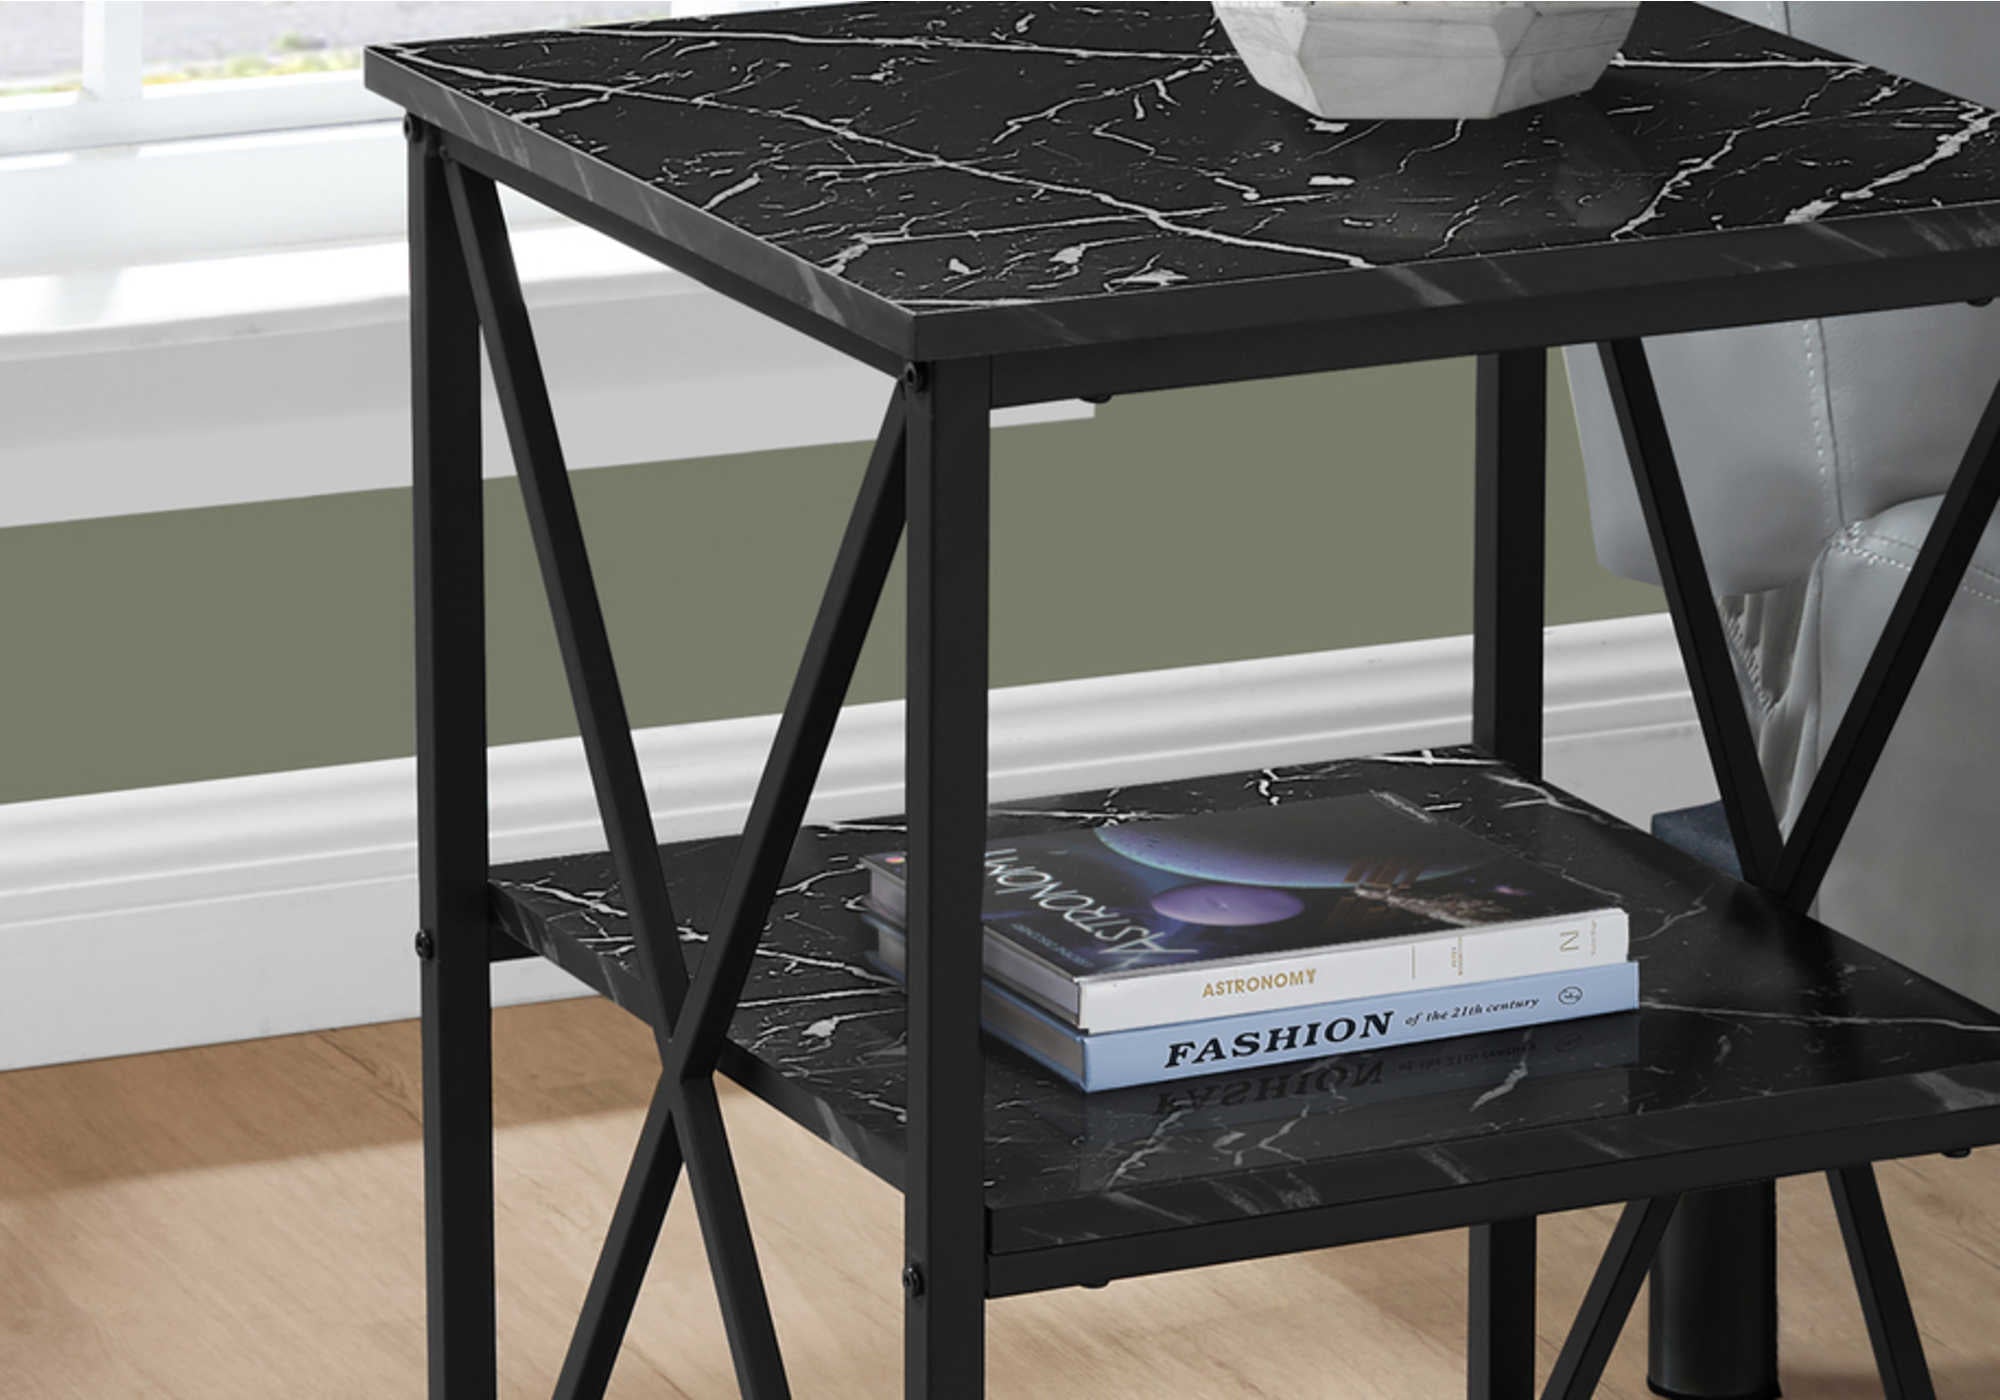 ACCENT TABLE - 26"H / BLACK MARBLE / BLACK METAL